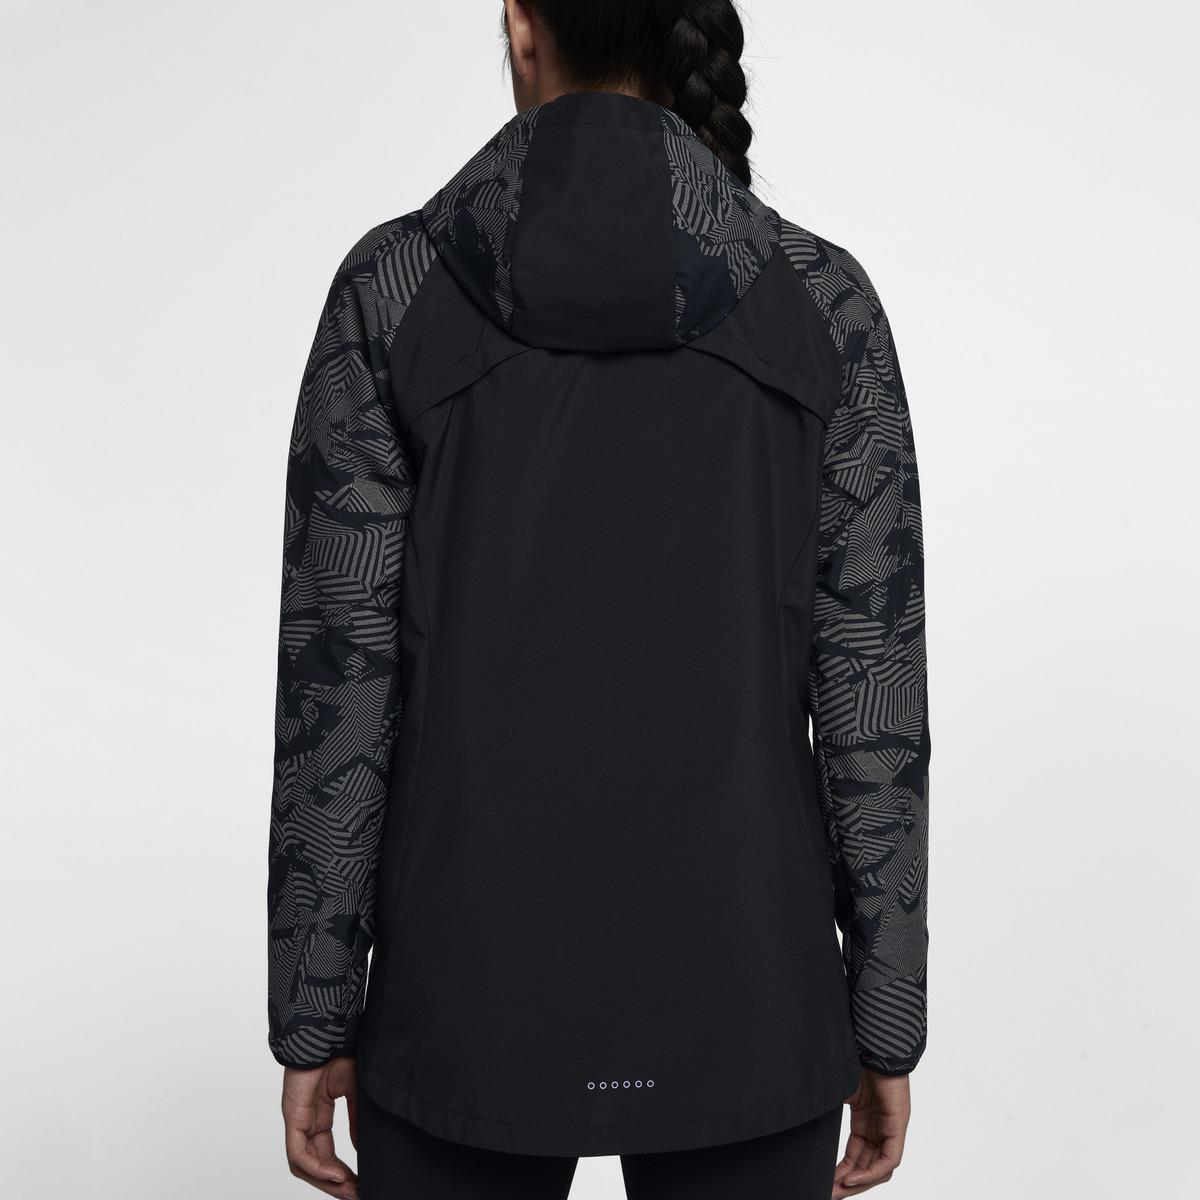 Nike Synthetic Essential Flash Women's Running Jacket in Black - Lyst